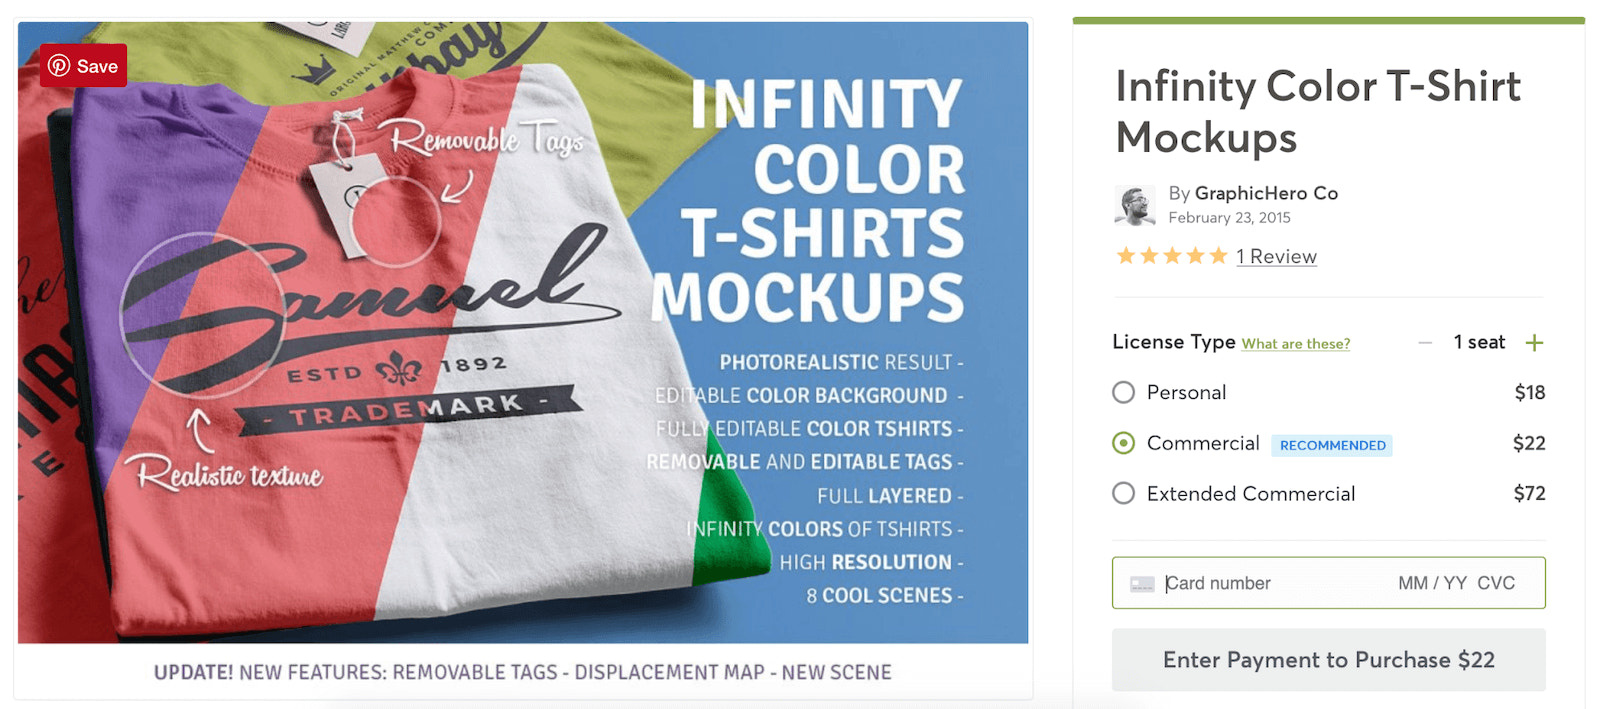 Download T-Shirt Templates and Mockups to Design Your Own Apparel